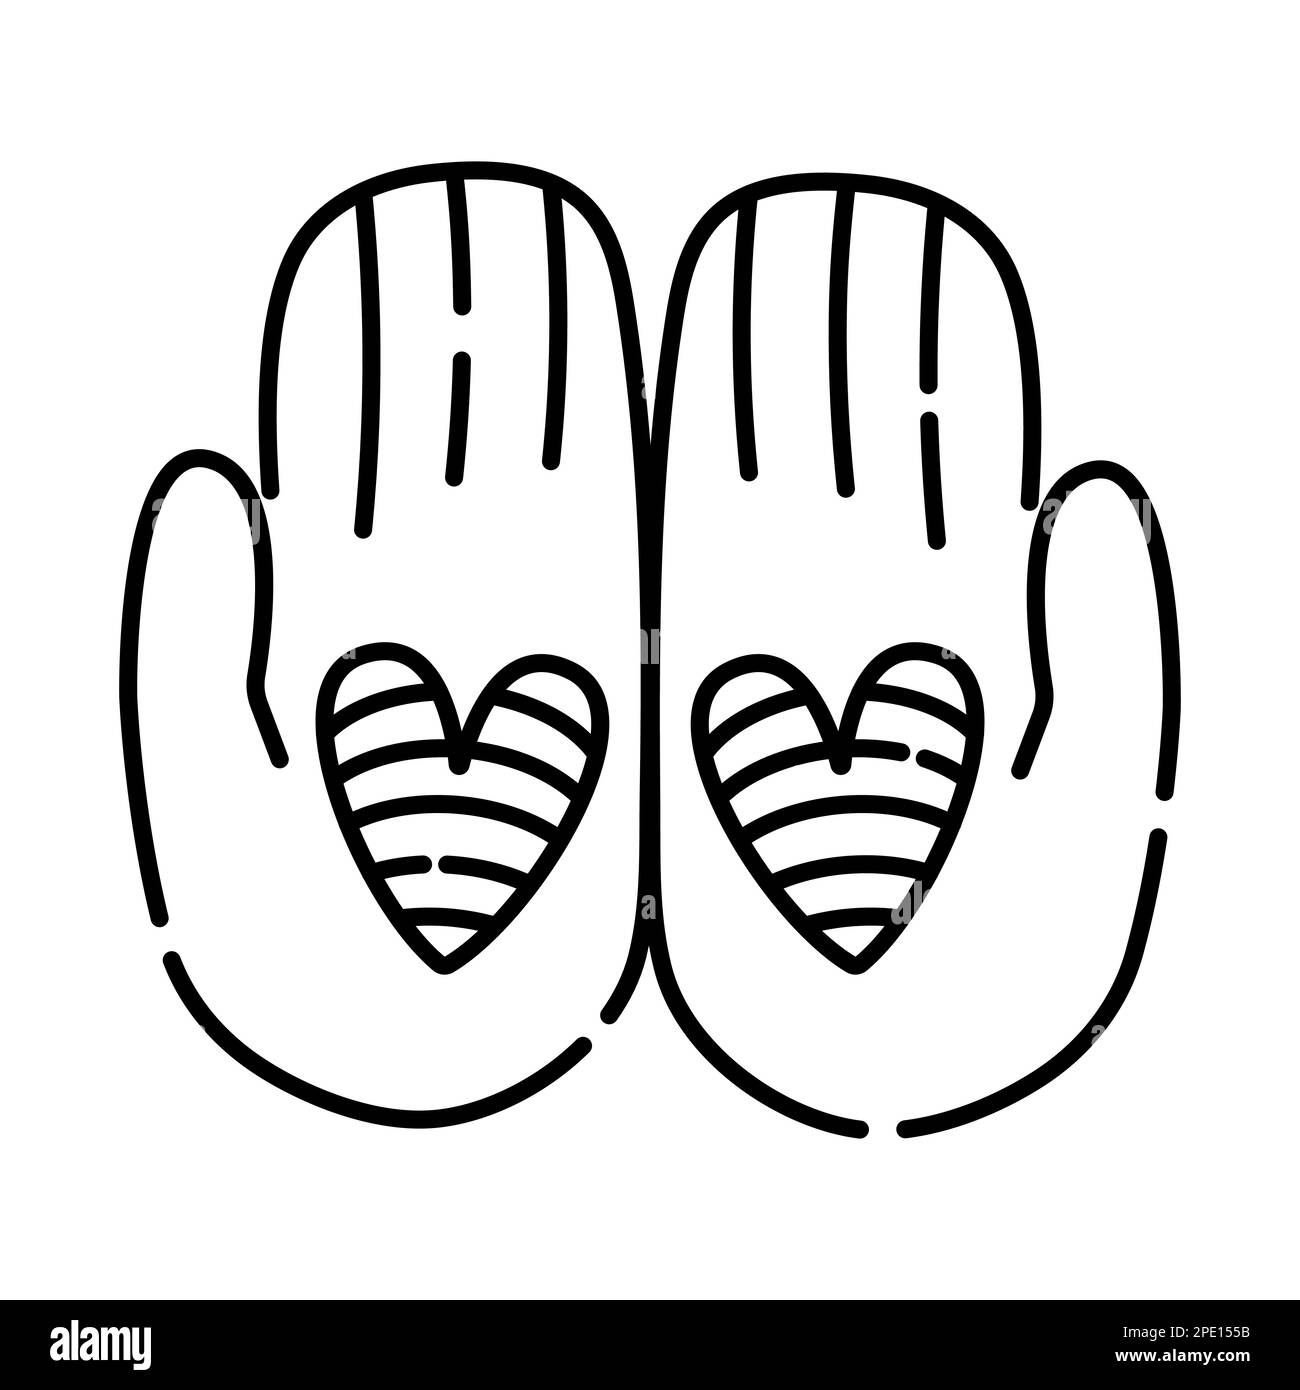 Two hands with hearts, symbol of trust, vector black line illustration Stock Vector